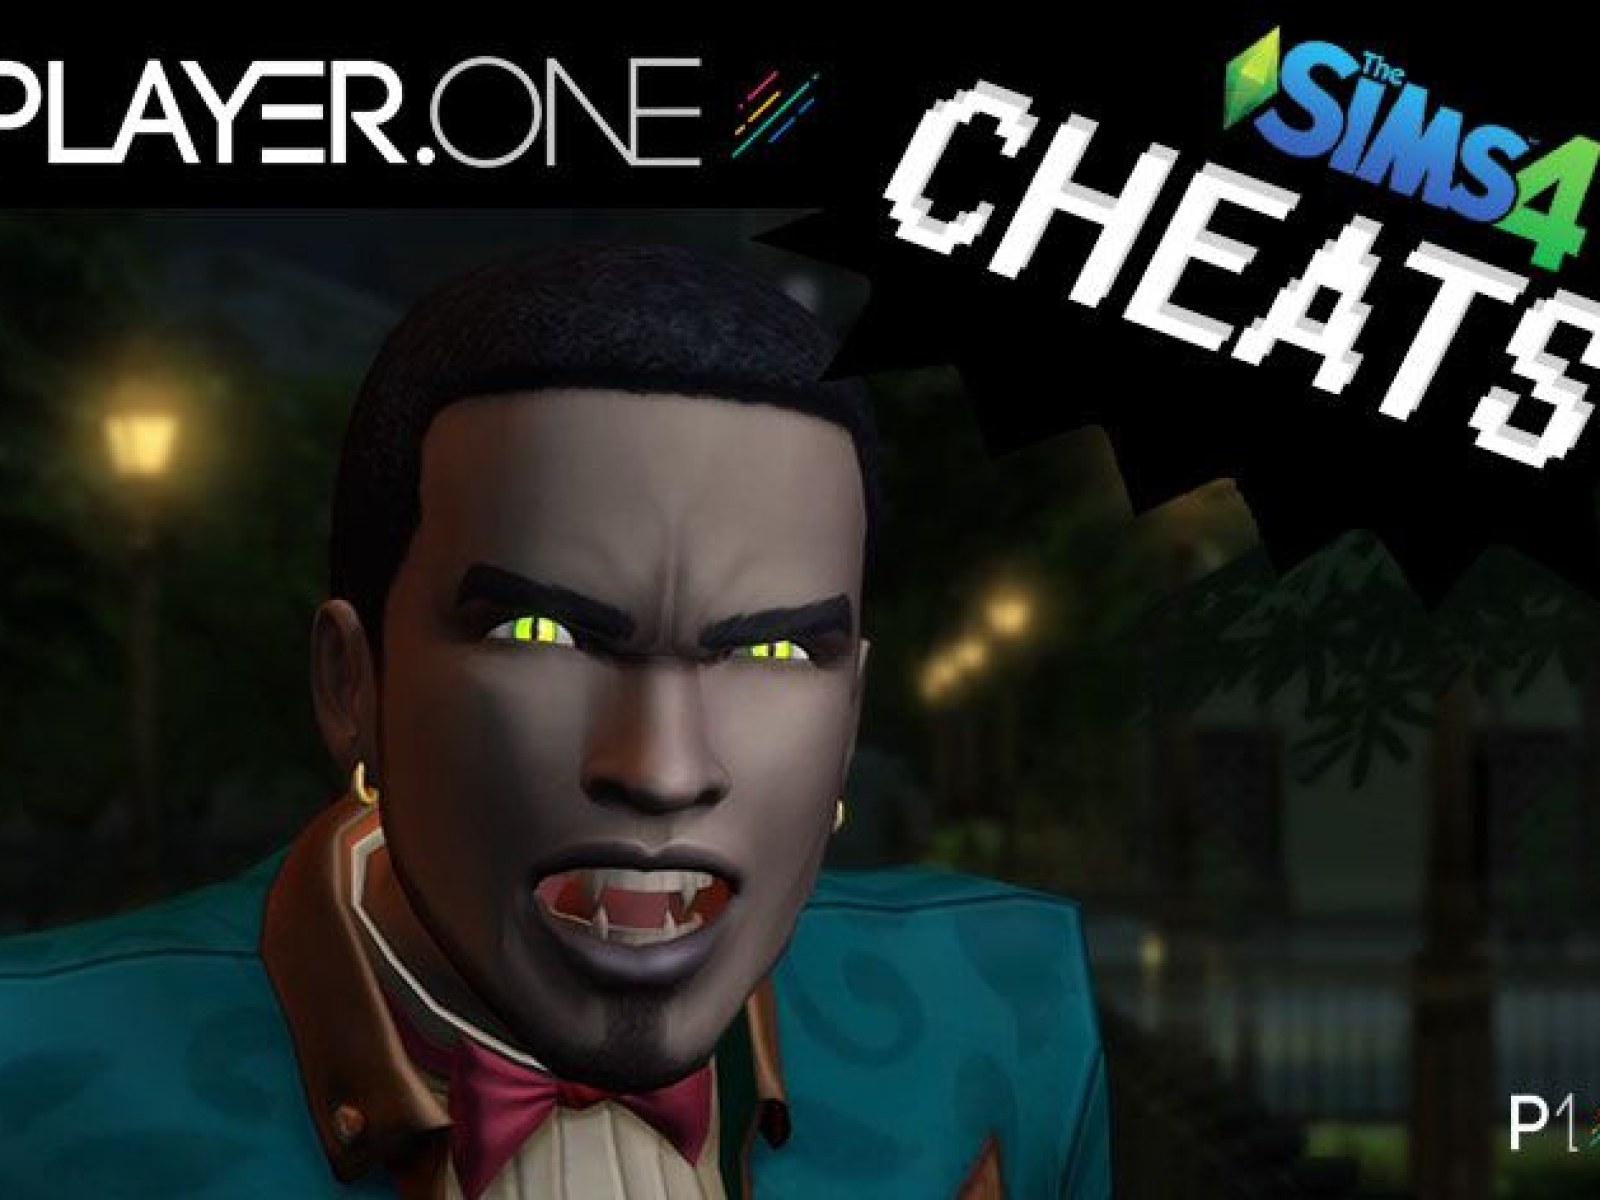 Sims 4' Vampire Cheats: Get All Powers, Max Out Lore Skill & Rank